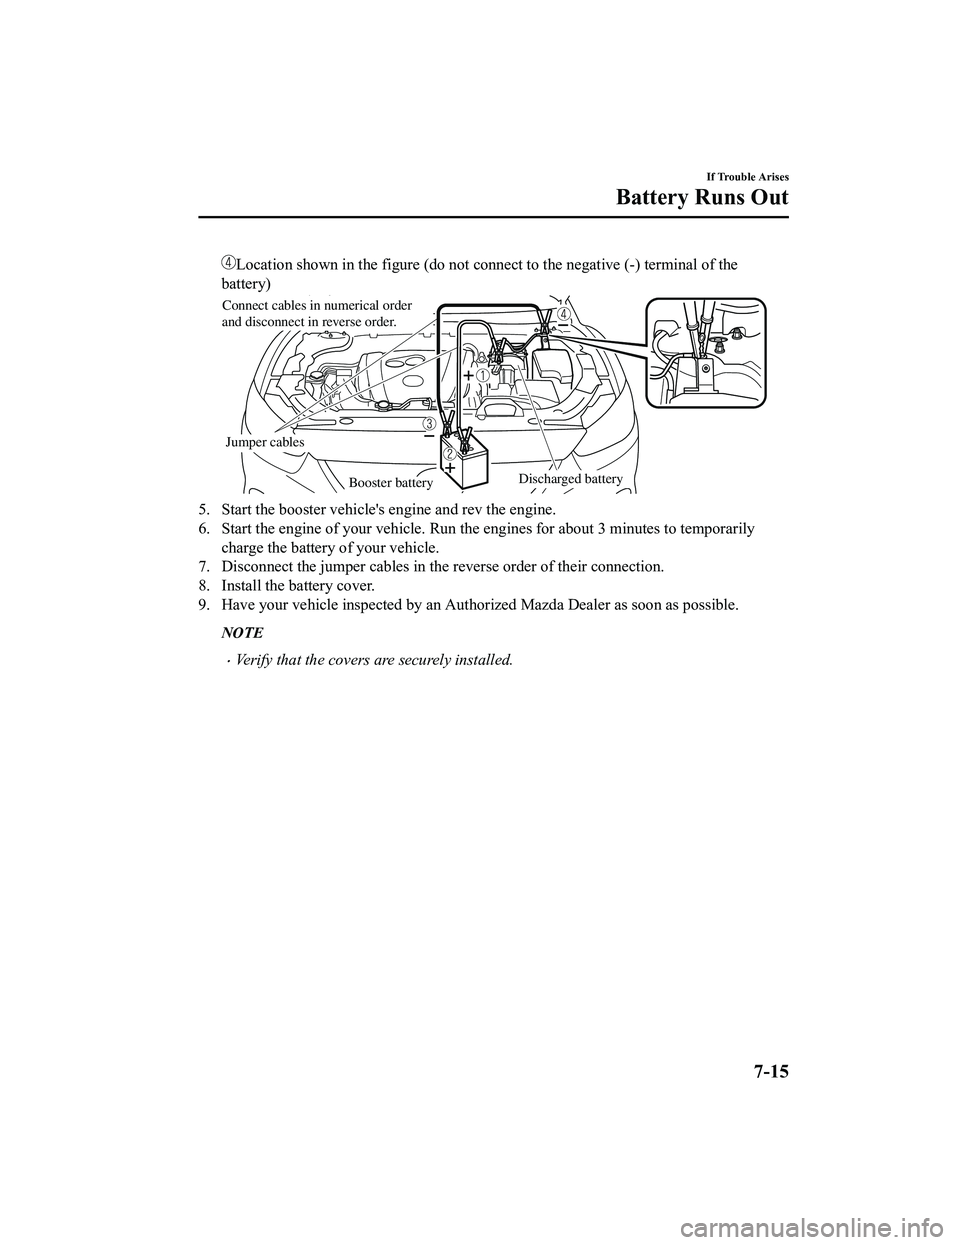 MAZDA MODEL CX-5 2022  Owners Manual Location shown in the figure (do not connect to the negative (-) terminal of the
battery)
Booster batteryDischarged battery
Jumper cables
Connect cables in numerical order 
and disconnect in reverse o